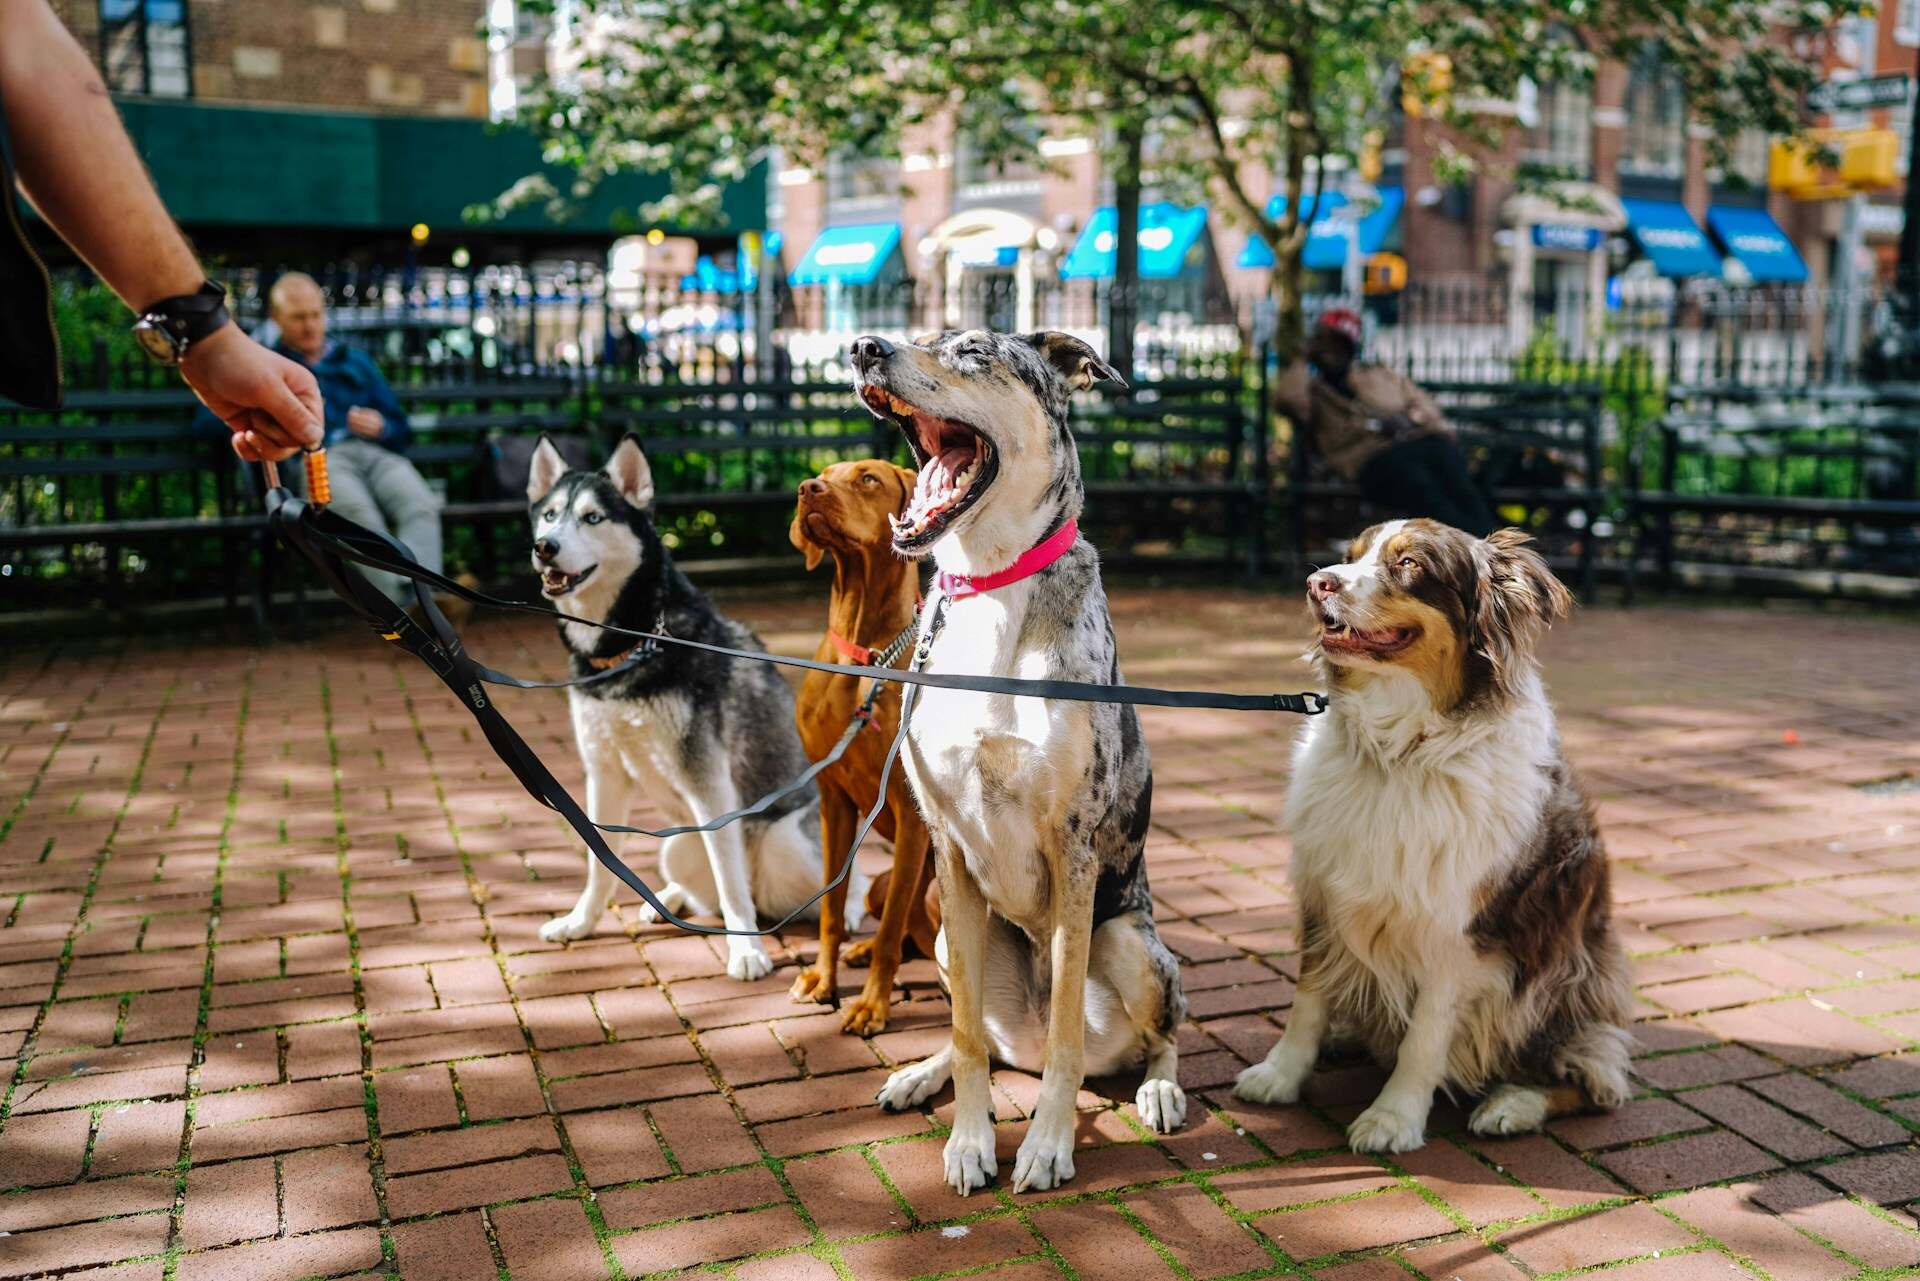 A pack of leashed dogs at a park